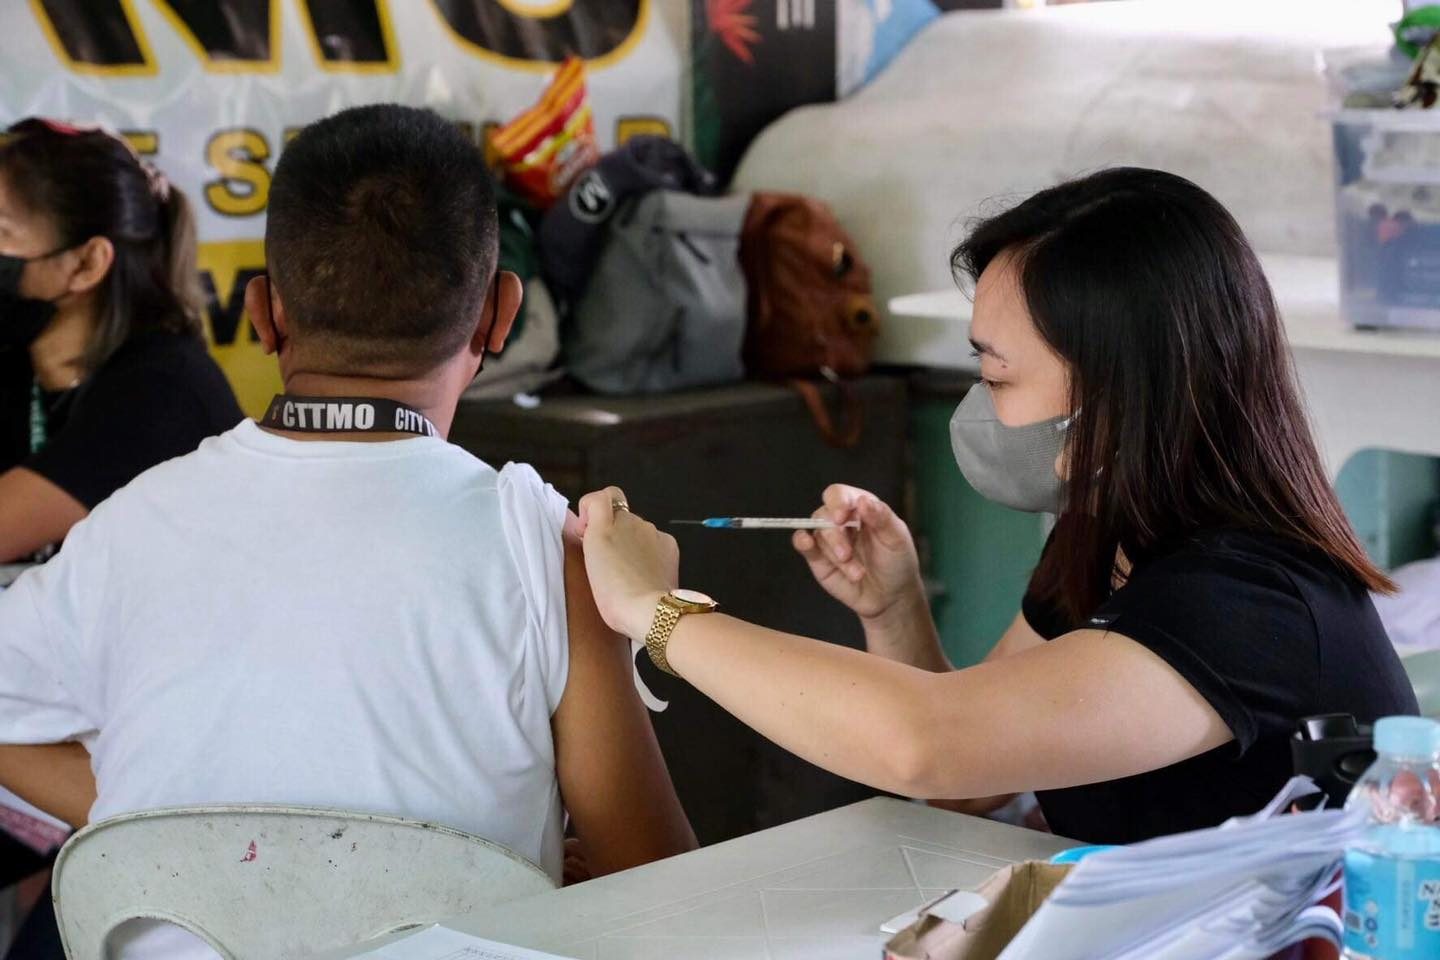 DOH urges Davao Region hospitals to get ready for likely COVID-19 surge